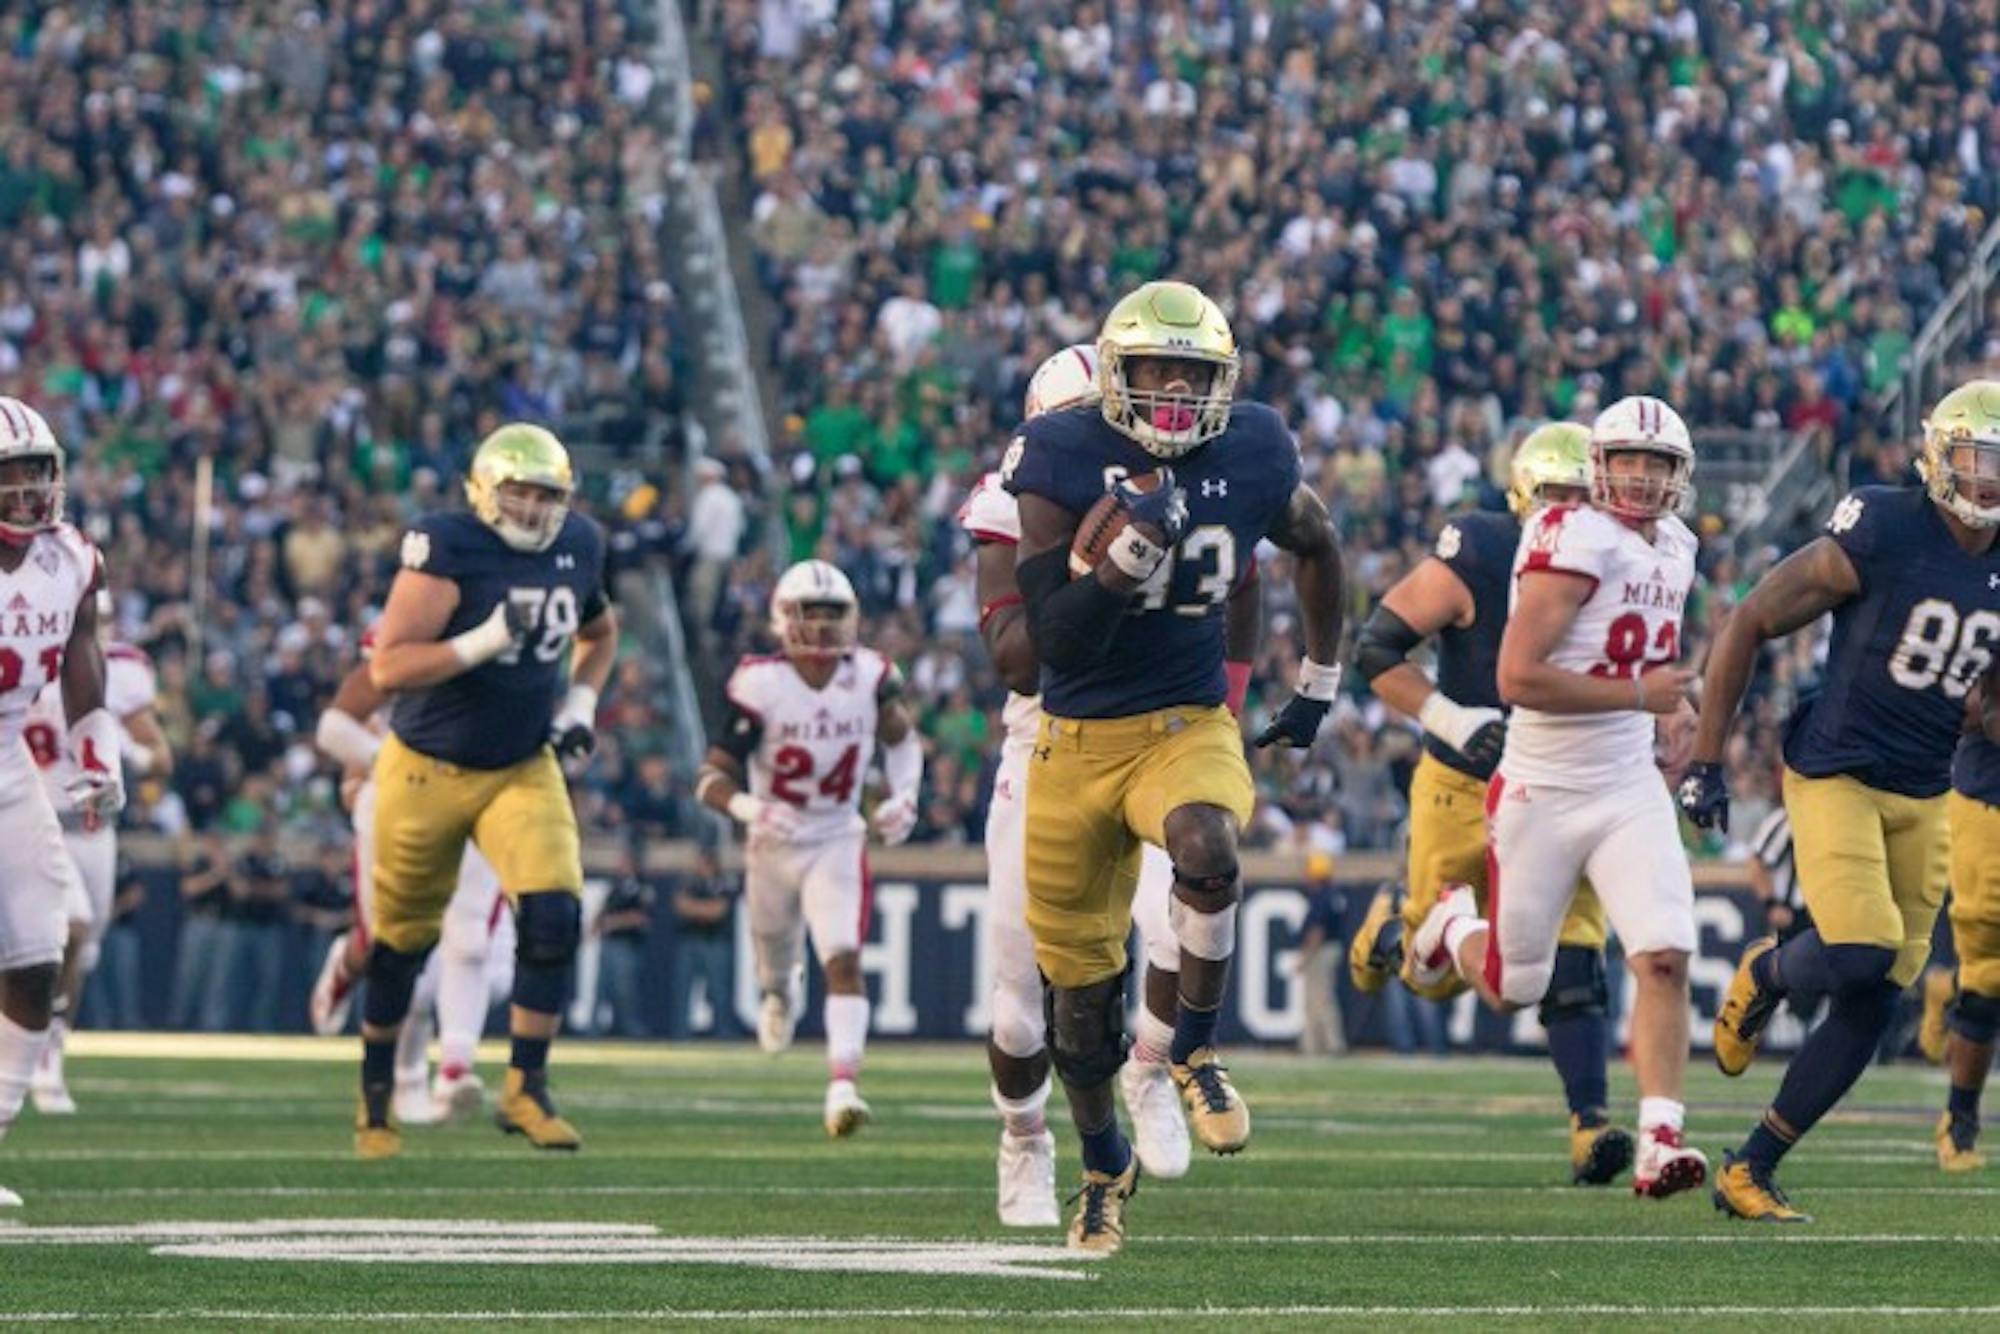 Irish junior running back Josh Adams breaks away from the back for a touchdown run during Notre Dame’s 52-17 win over Miami (OH) on Saturday at Notre Dame Stadium.